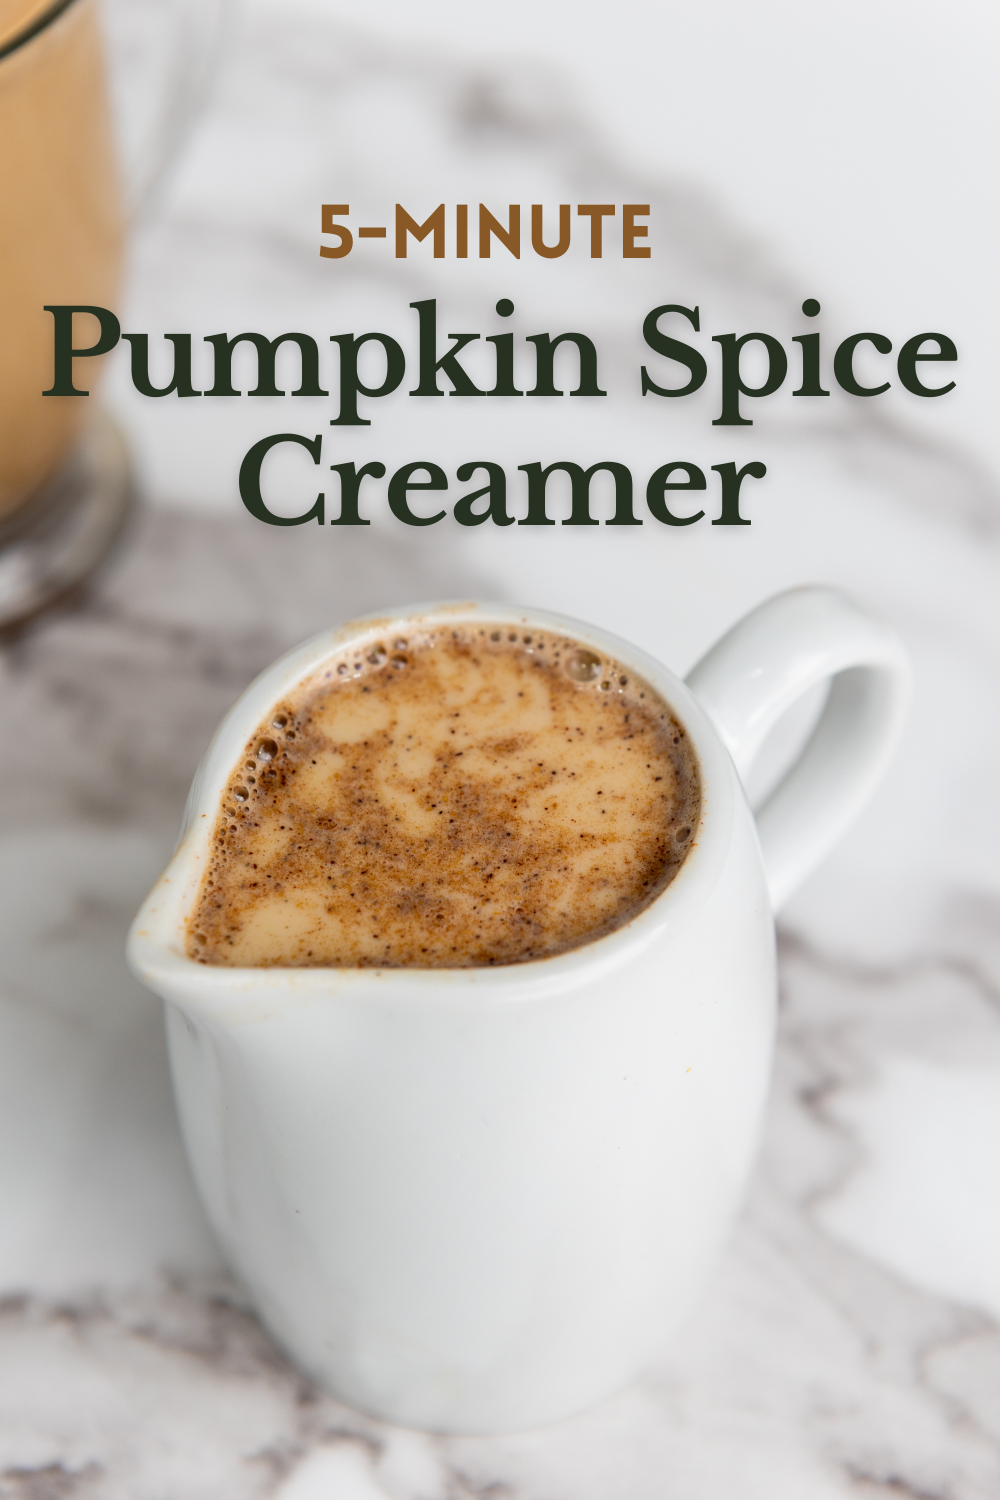 Homemade Pumpkin Spice Creamer wraps up all of the best flavors of fall in an easy-to-make creamer for your favorite cup of coffee or tea!